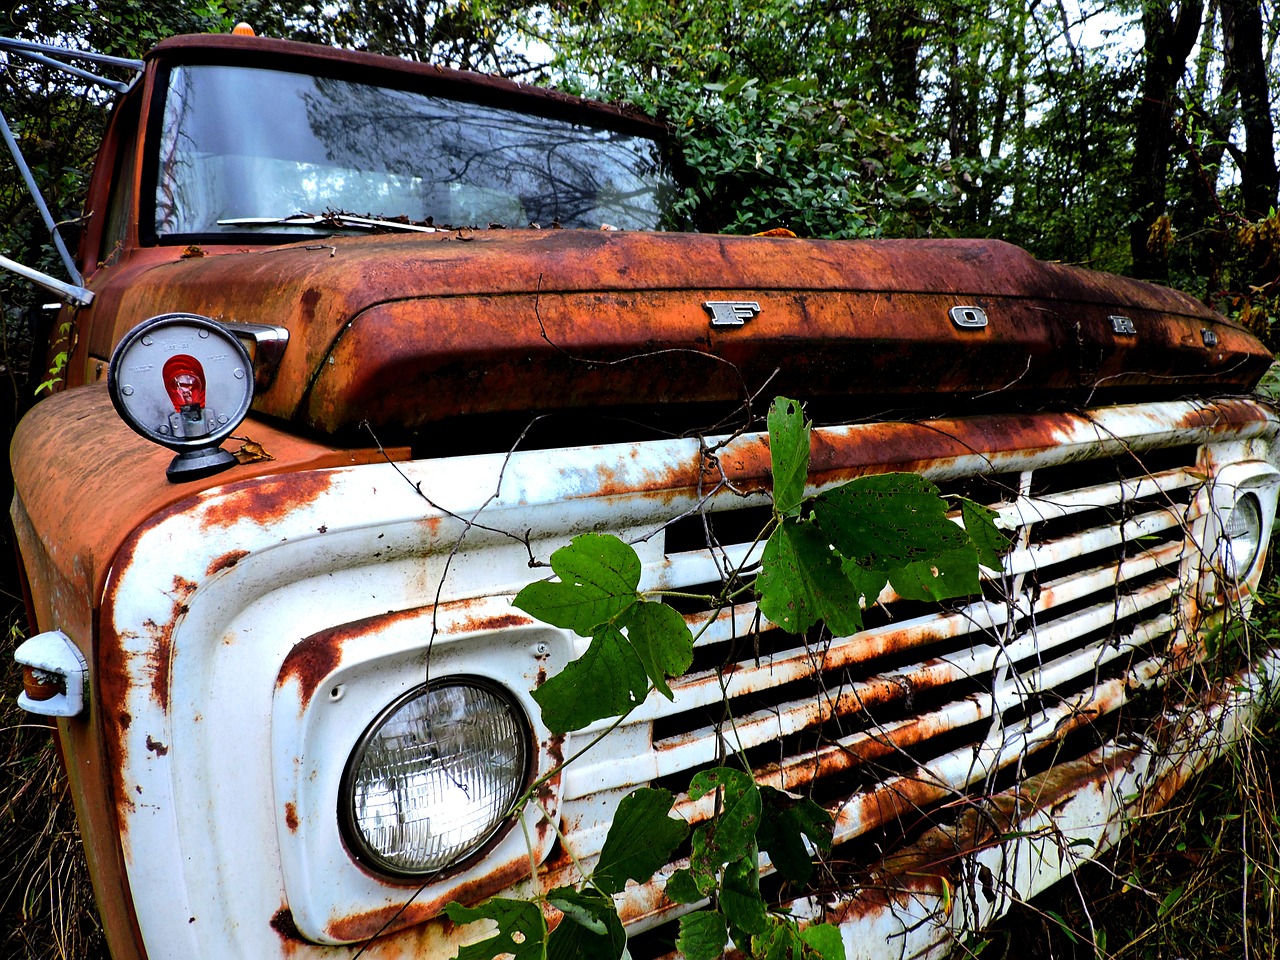 Download free photo of Ford,vintage truck,old truck,car,truck - from ...